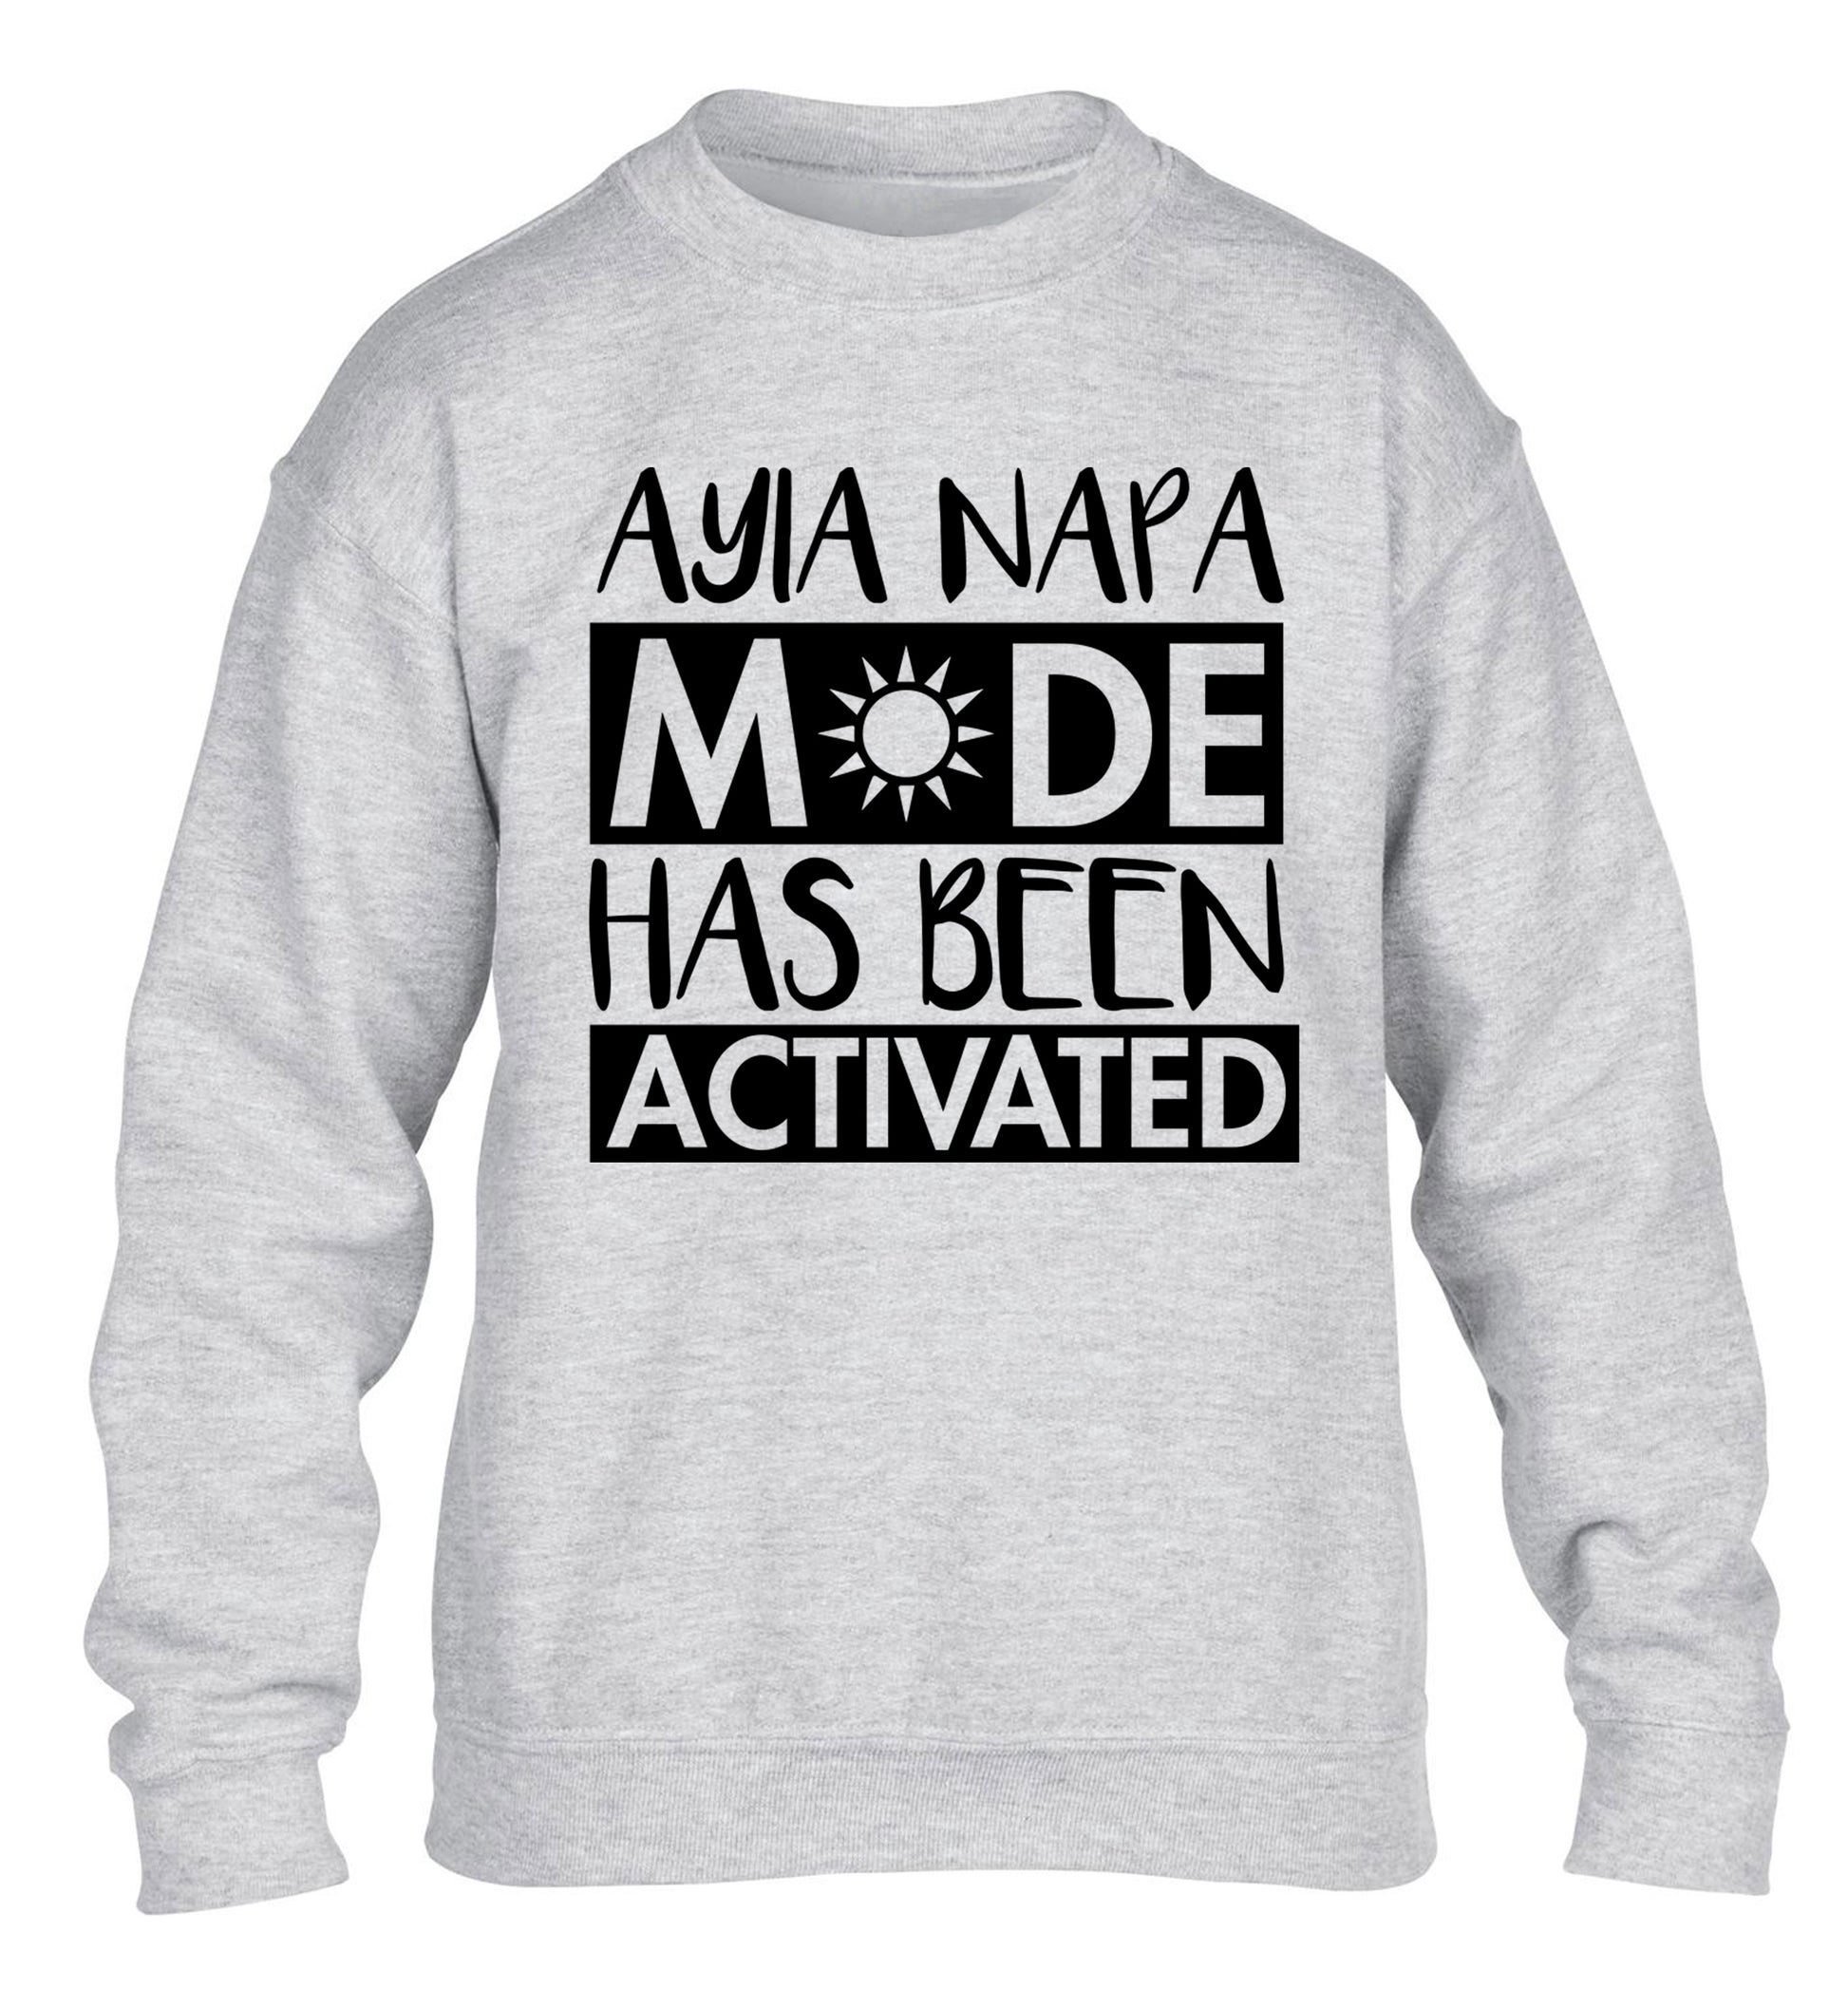 Ayia Napa mode has been activated children's grey sweater 12-13 Years